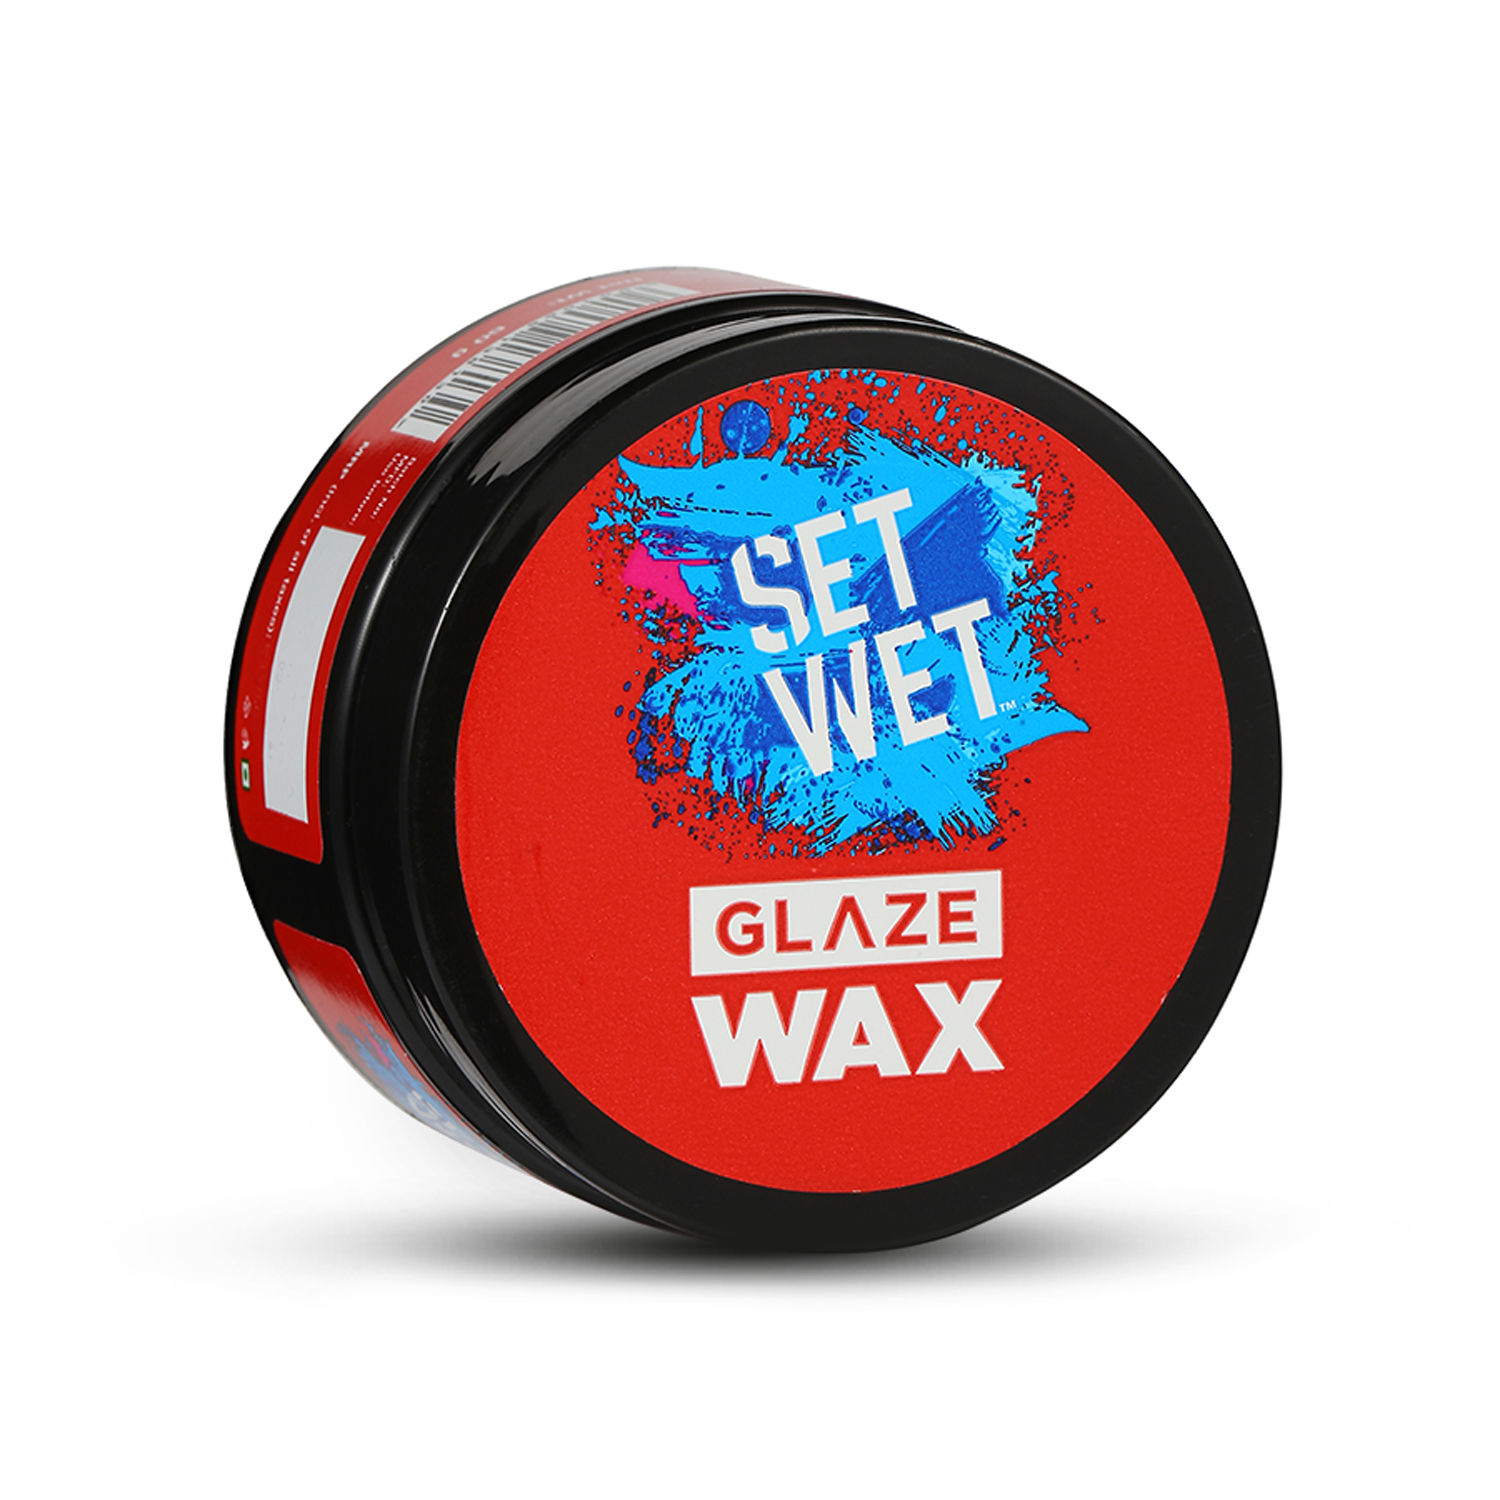 Set Wet Styling Glaze Hair Wax | Healthy Shine Strong Hold Restylable Anytime Easy Wash off